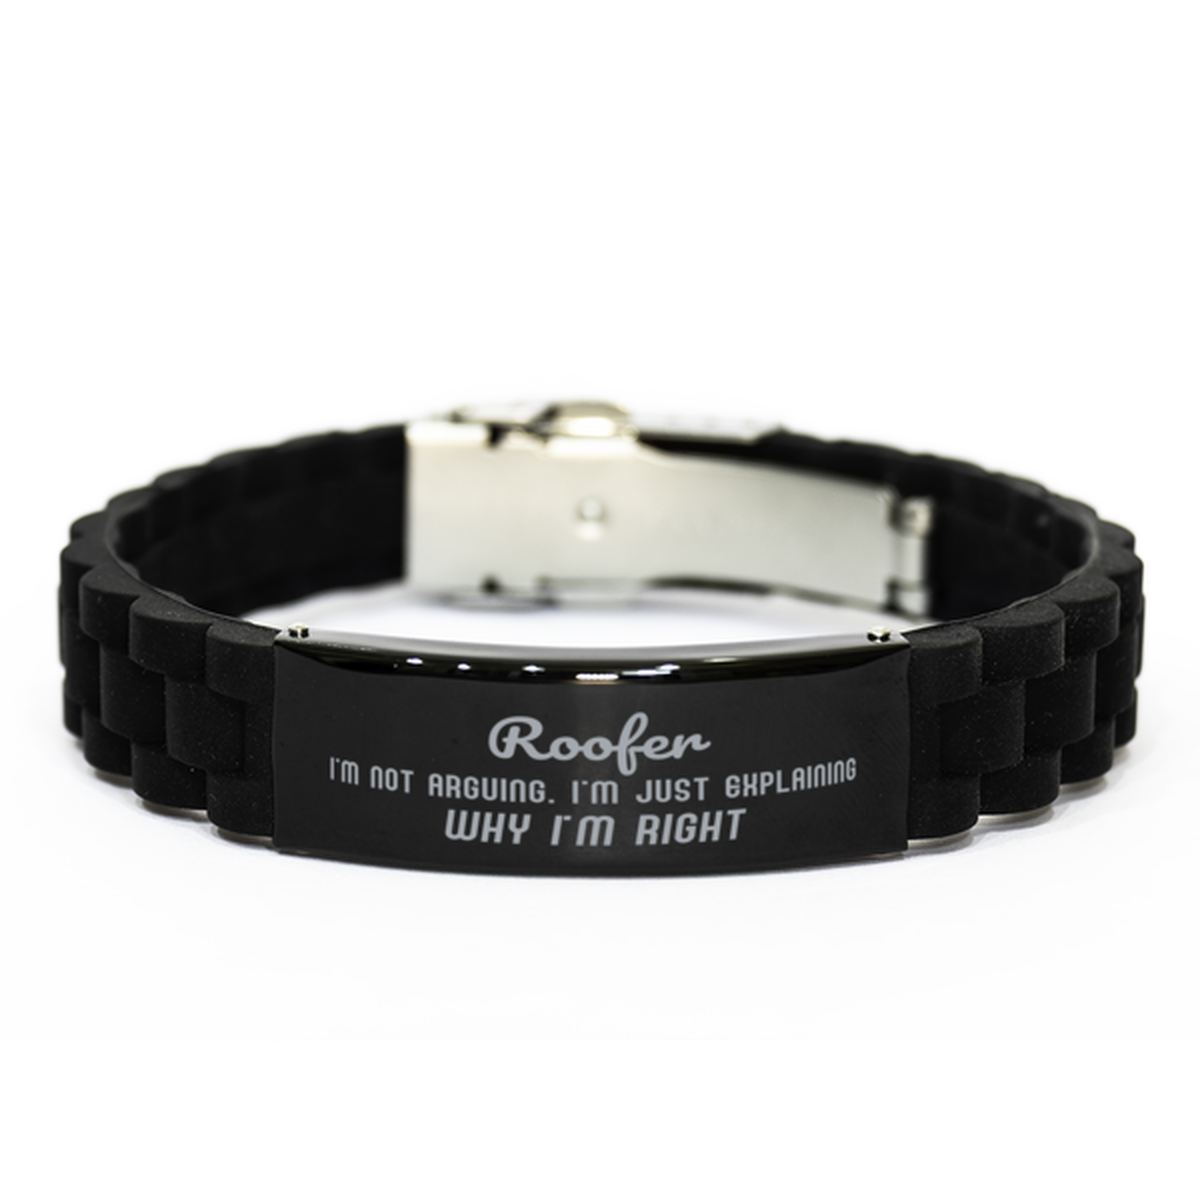 Roofer I'm not Arguing. I'm Just Explaining Why I'm RIGHT Black Glidelock Clasp Bracelet, Funny Saying Quote Roofer Gifts For Roofer Graduation Birthday Christmas Gifts for Men Women Coworker